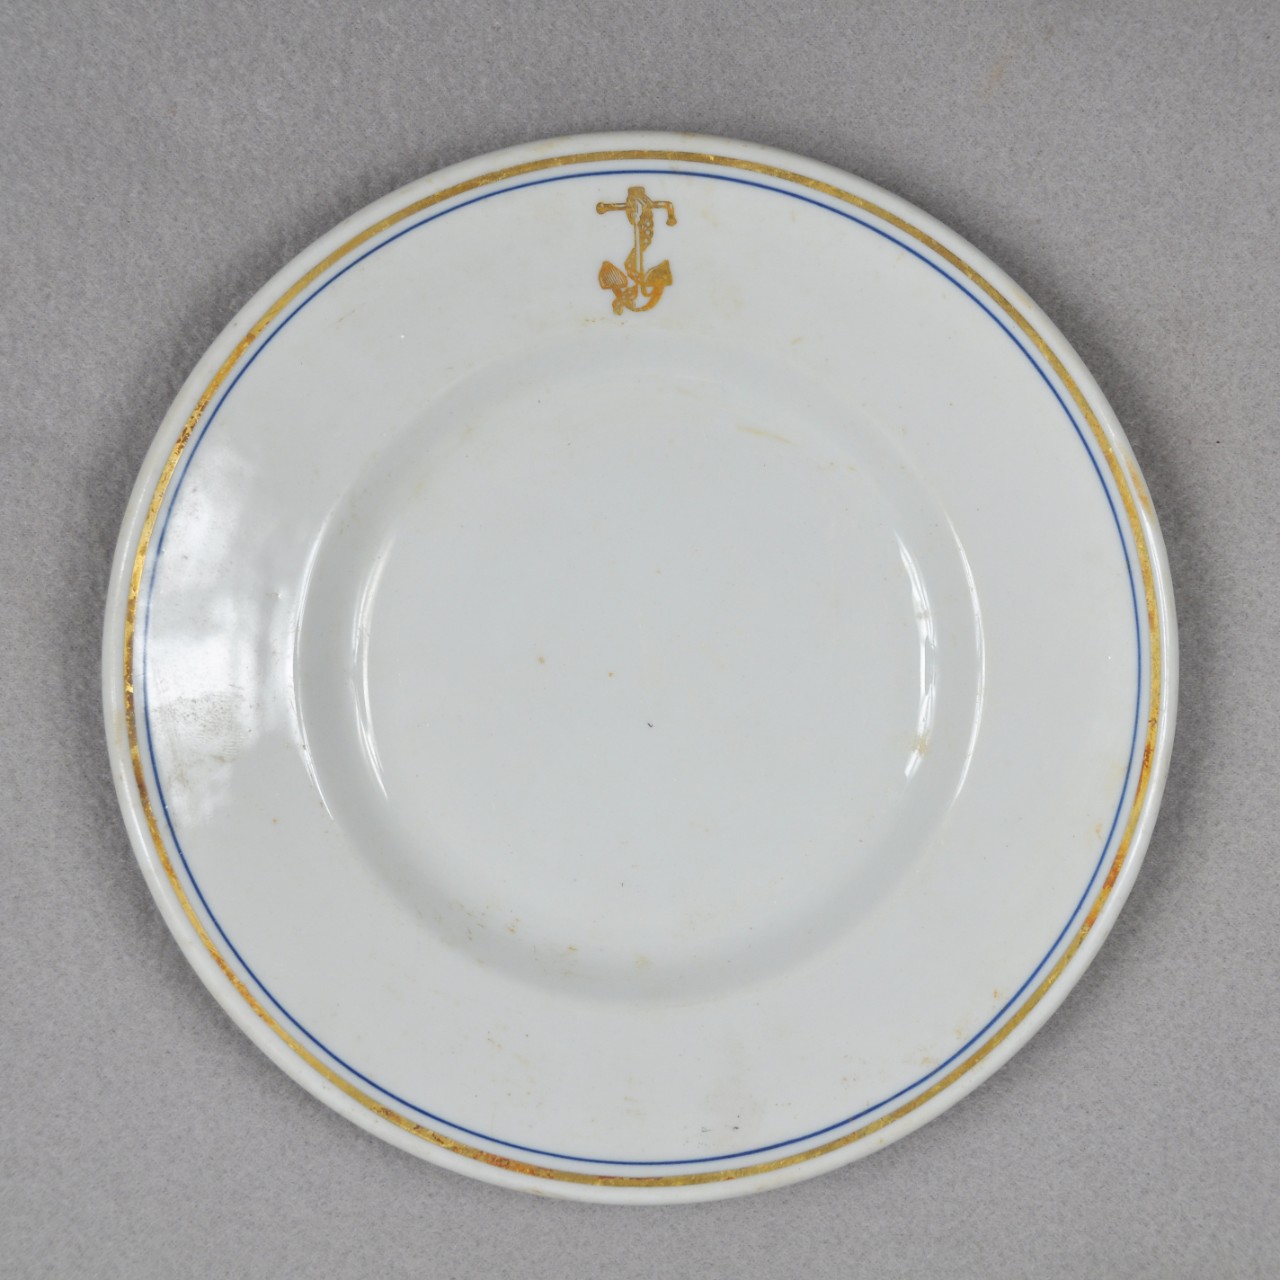 <p>A white ceramic plate with a gold and blue ring around the edge of the face of the plate. There is also a gold anchor with a chain wrapped around it on the lip.</p>